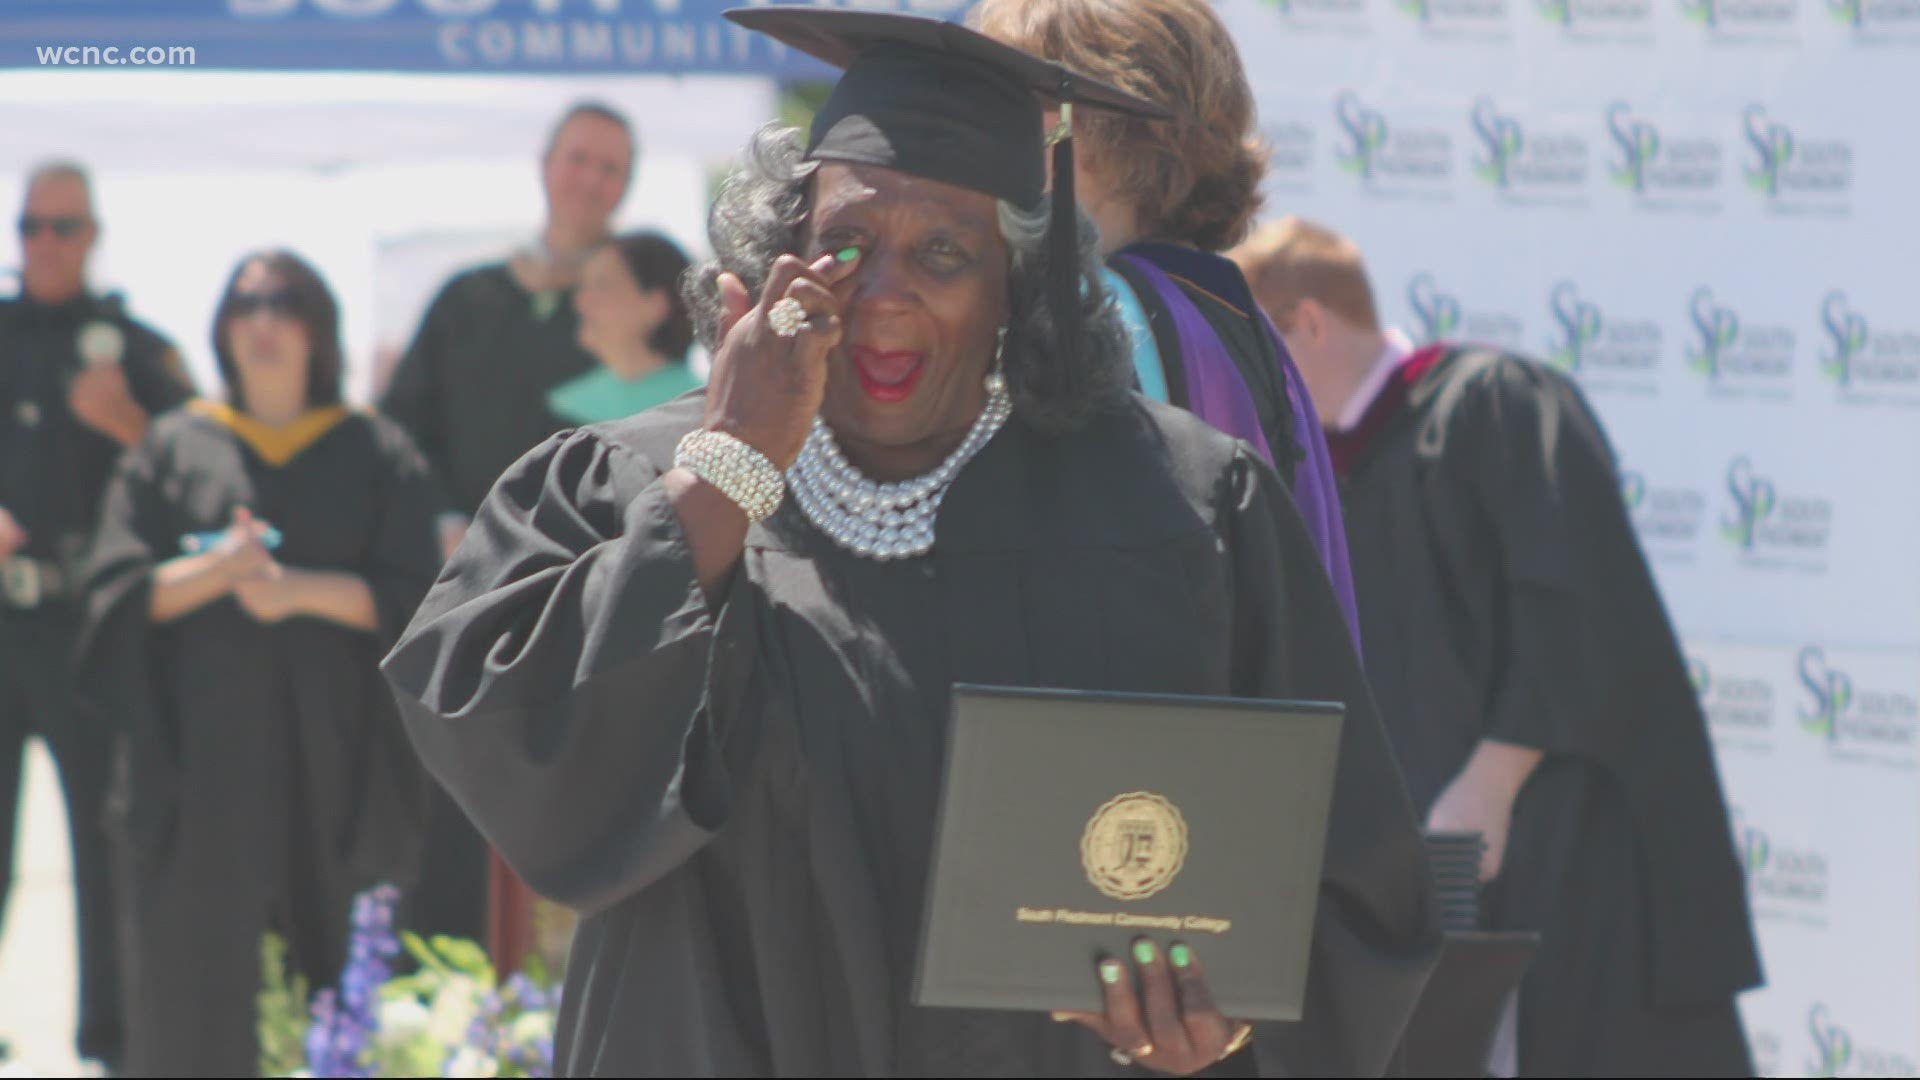 Judy Little's sister died before she could watch her walk across the stage and get her diploma. But Little said she could feel her sister with her that day.